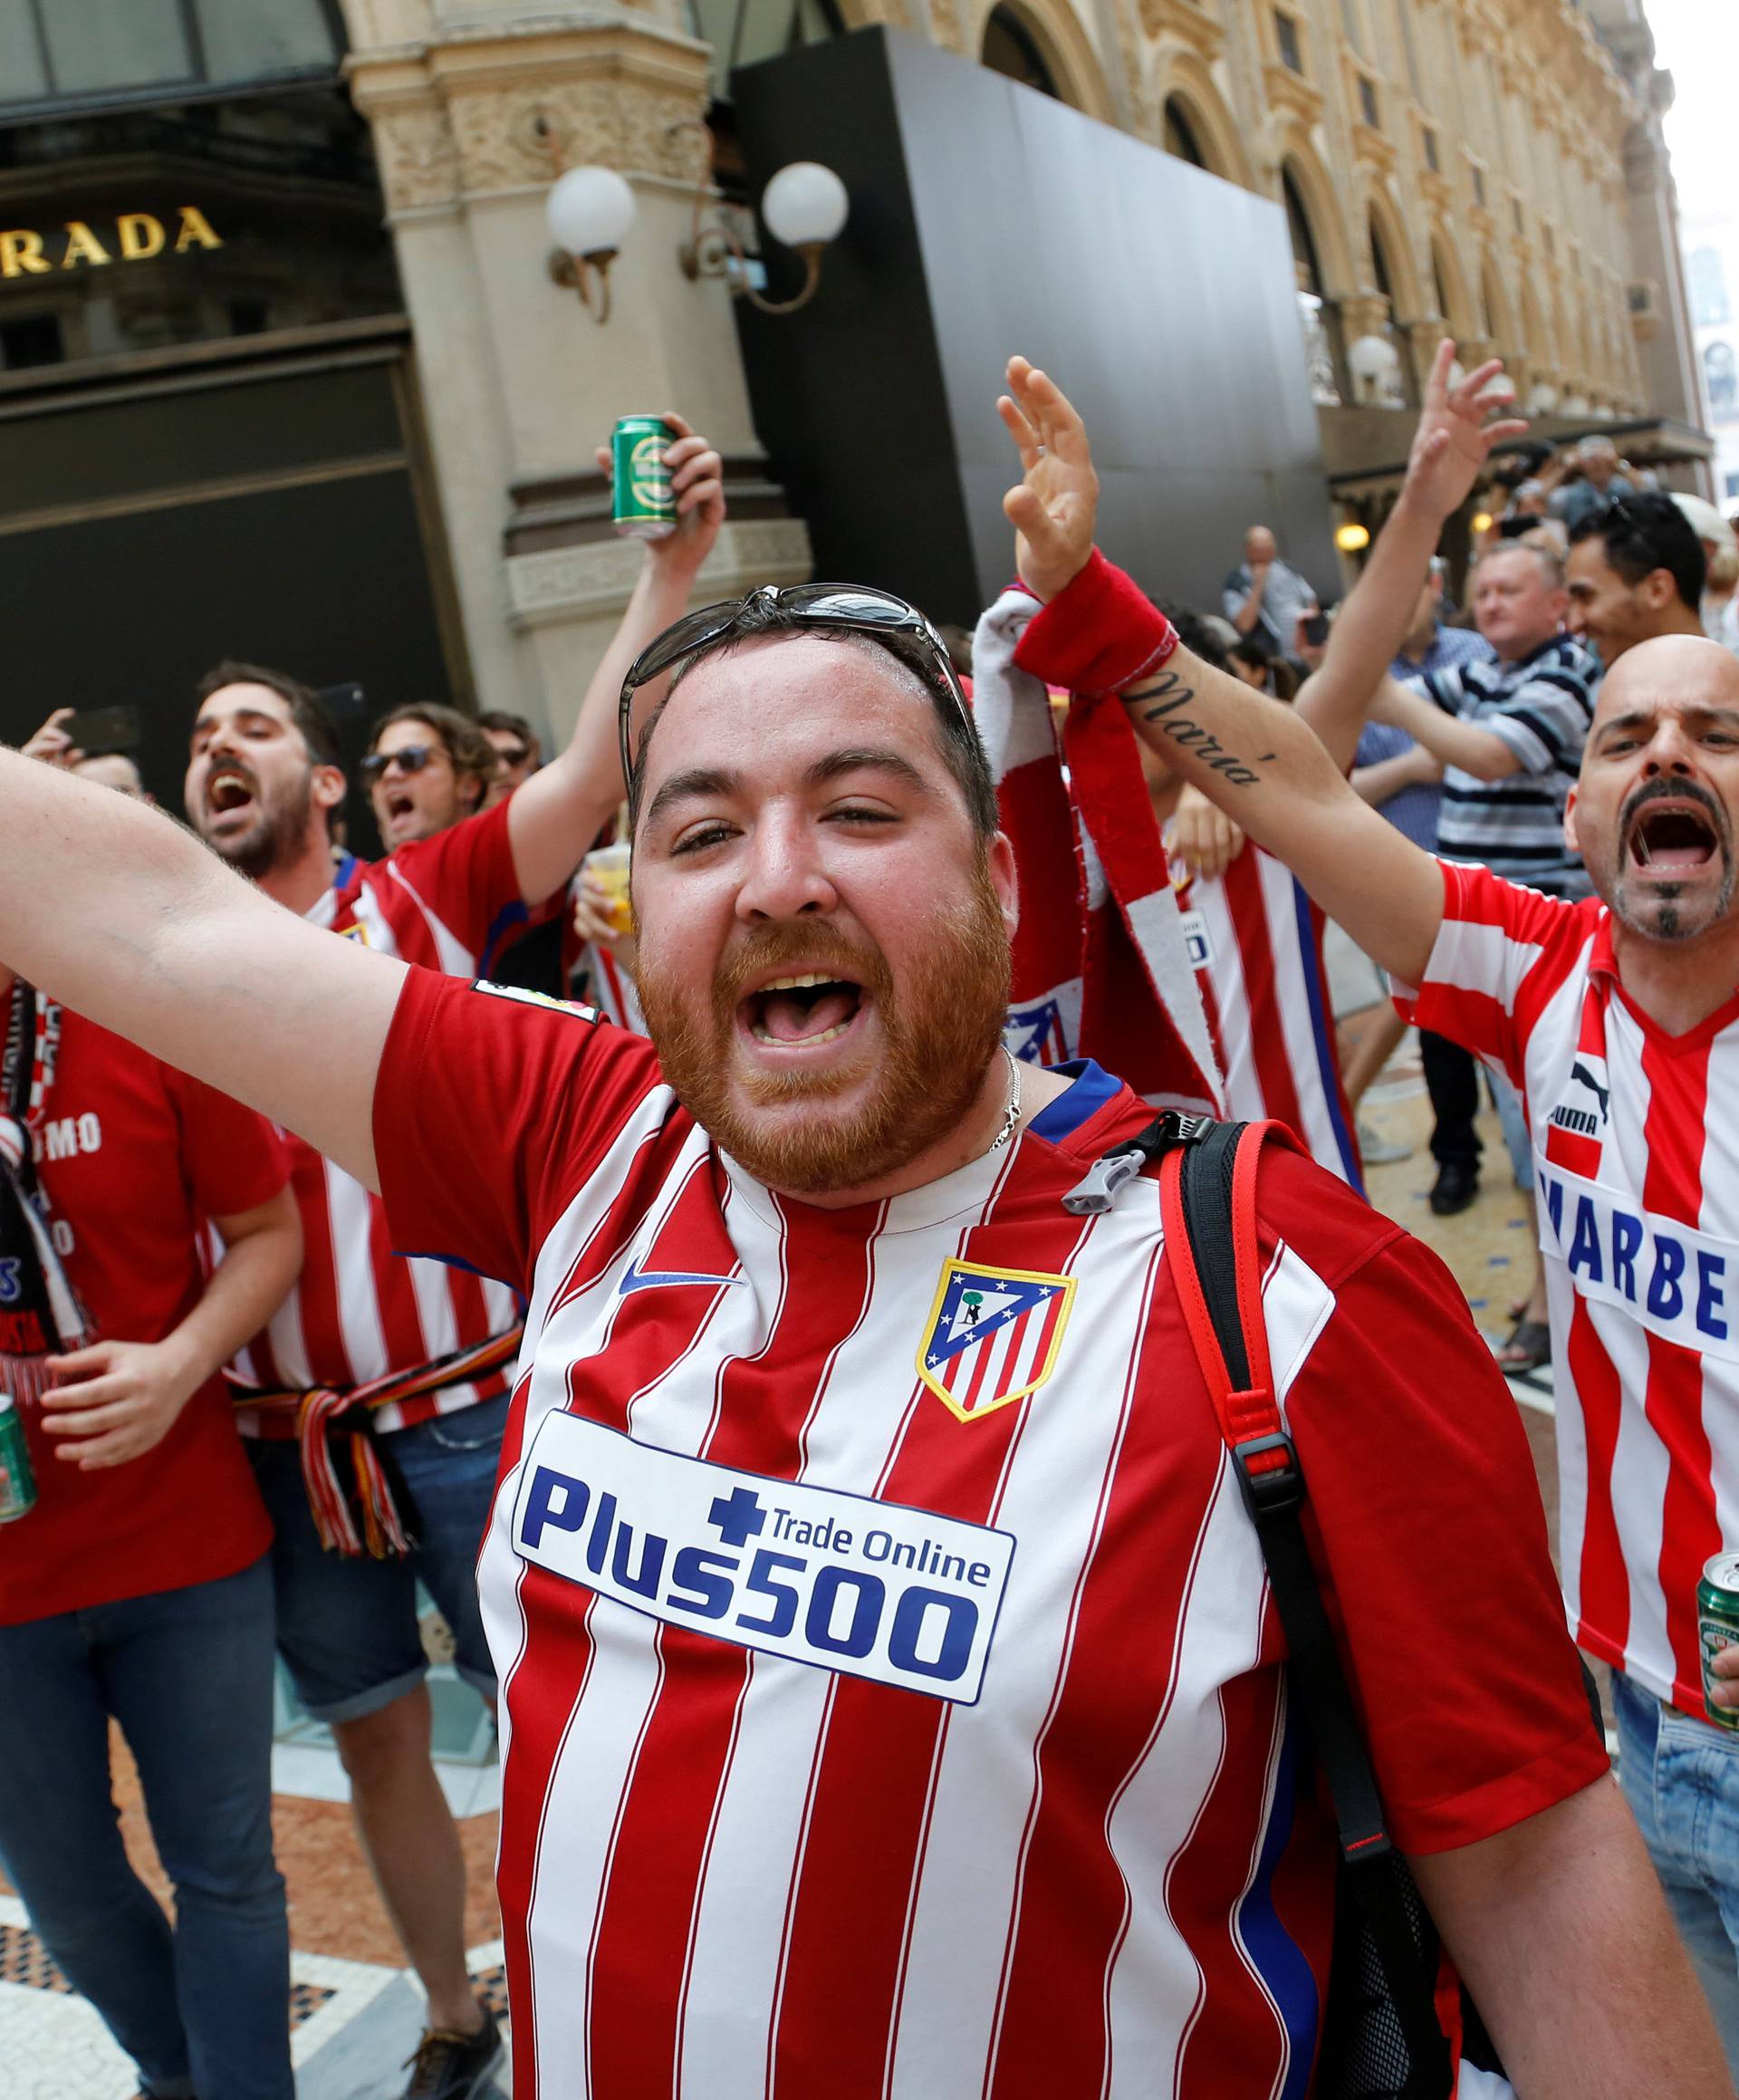 Atletico Madrid fans shout slogans before the Champions League Final between Real Madrid and Atletico Madrid in Milan